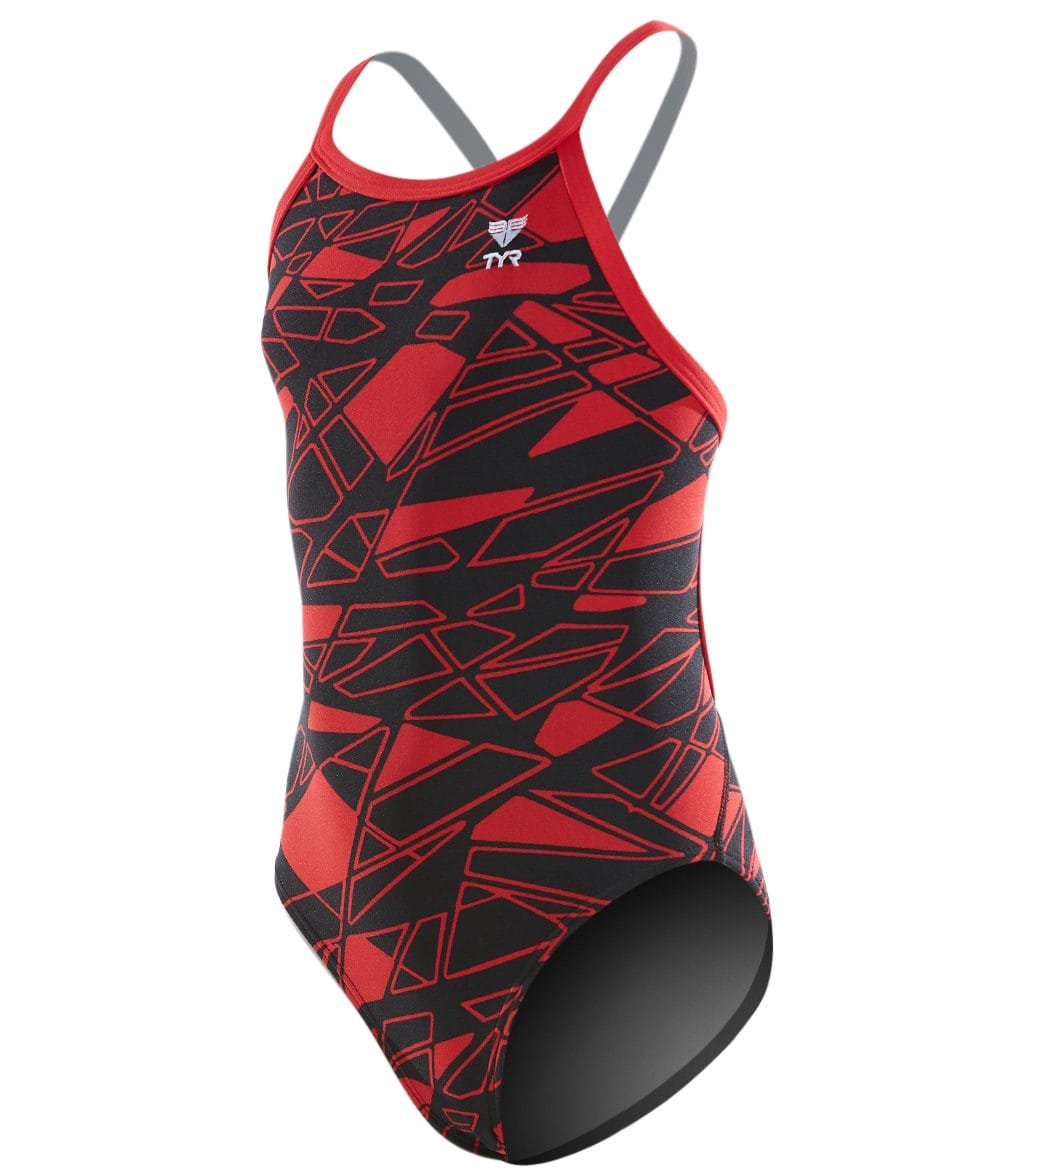 TYR Girls' Mantova Diamondfit One Piece Swimsuit - Red 24 Polyester/Spandex - Swimoutlet.com